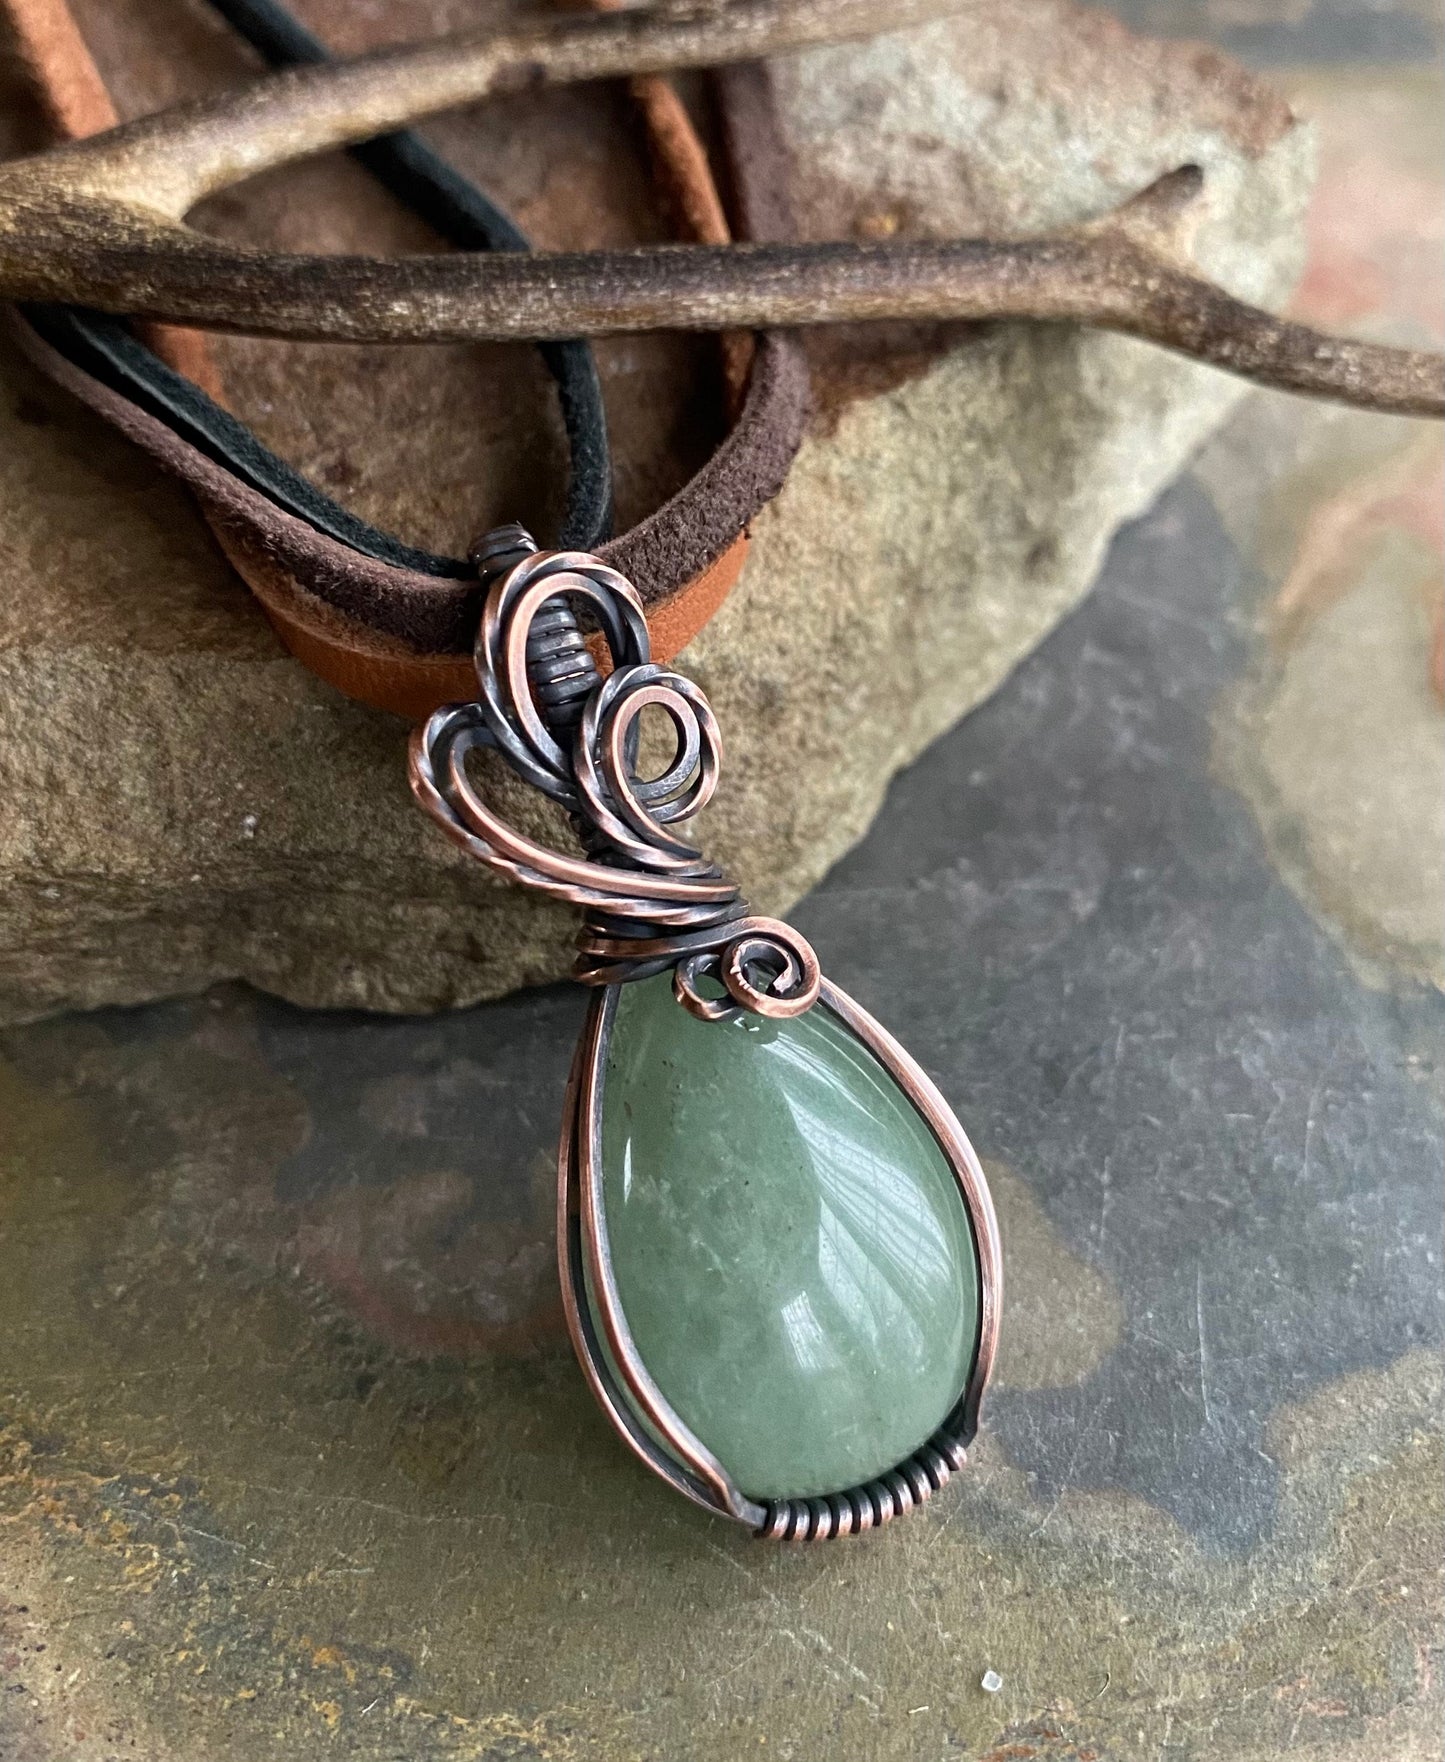 READY SHIP in 1 to 2 days, Wire Wrapped Aventurine Necklace, Aventurine in Copper wire, Wired Aventurine Pendant Jewelry, Green Necklace